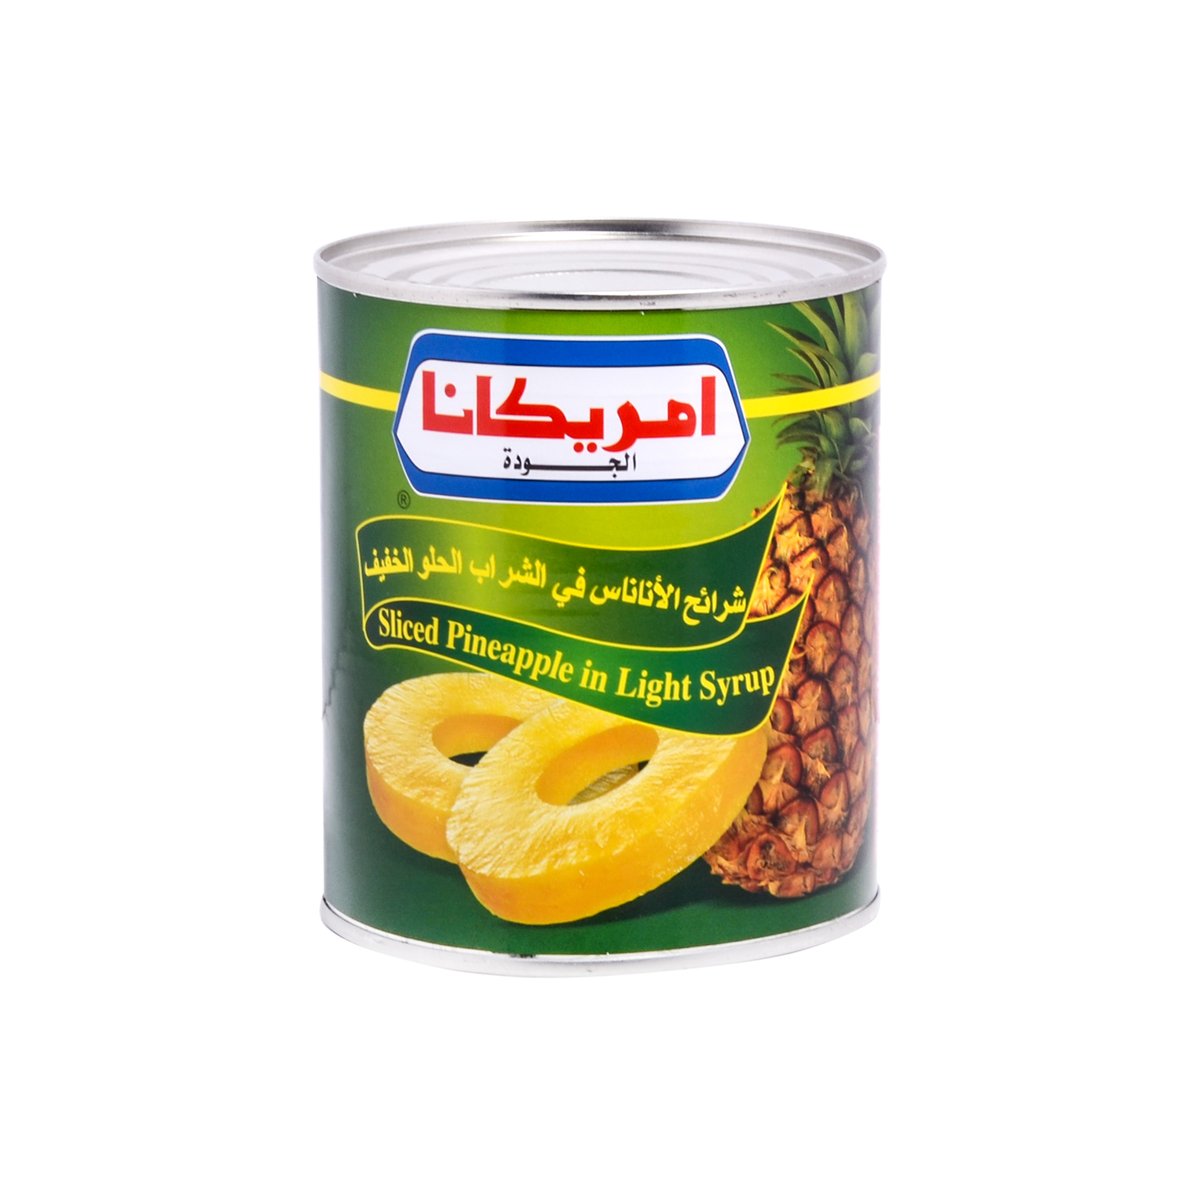 Americana Sliced Pineapple In Light Syrup 825g